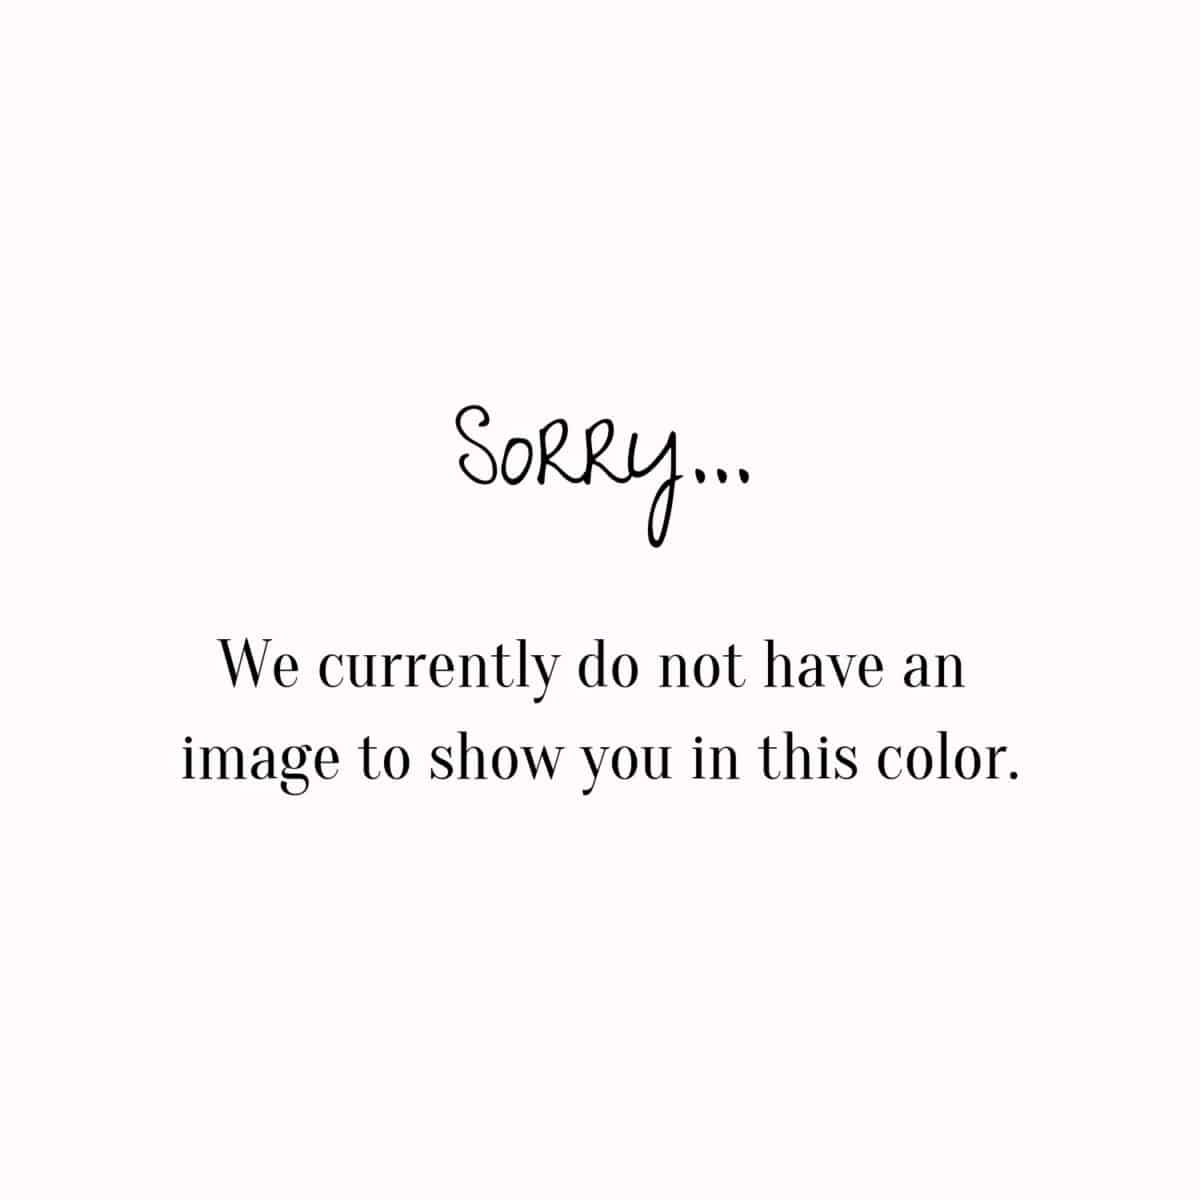 Sorry-We-dont-currently-have-an-image-to-show-you-with-this-color.